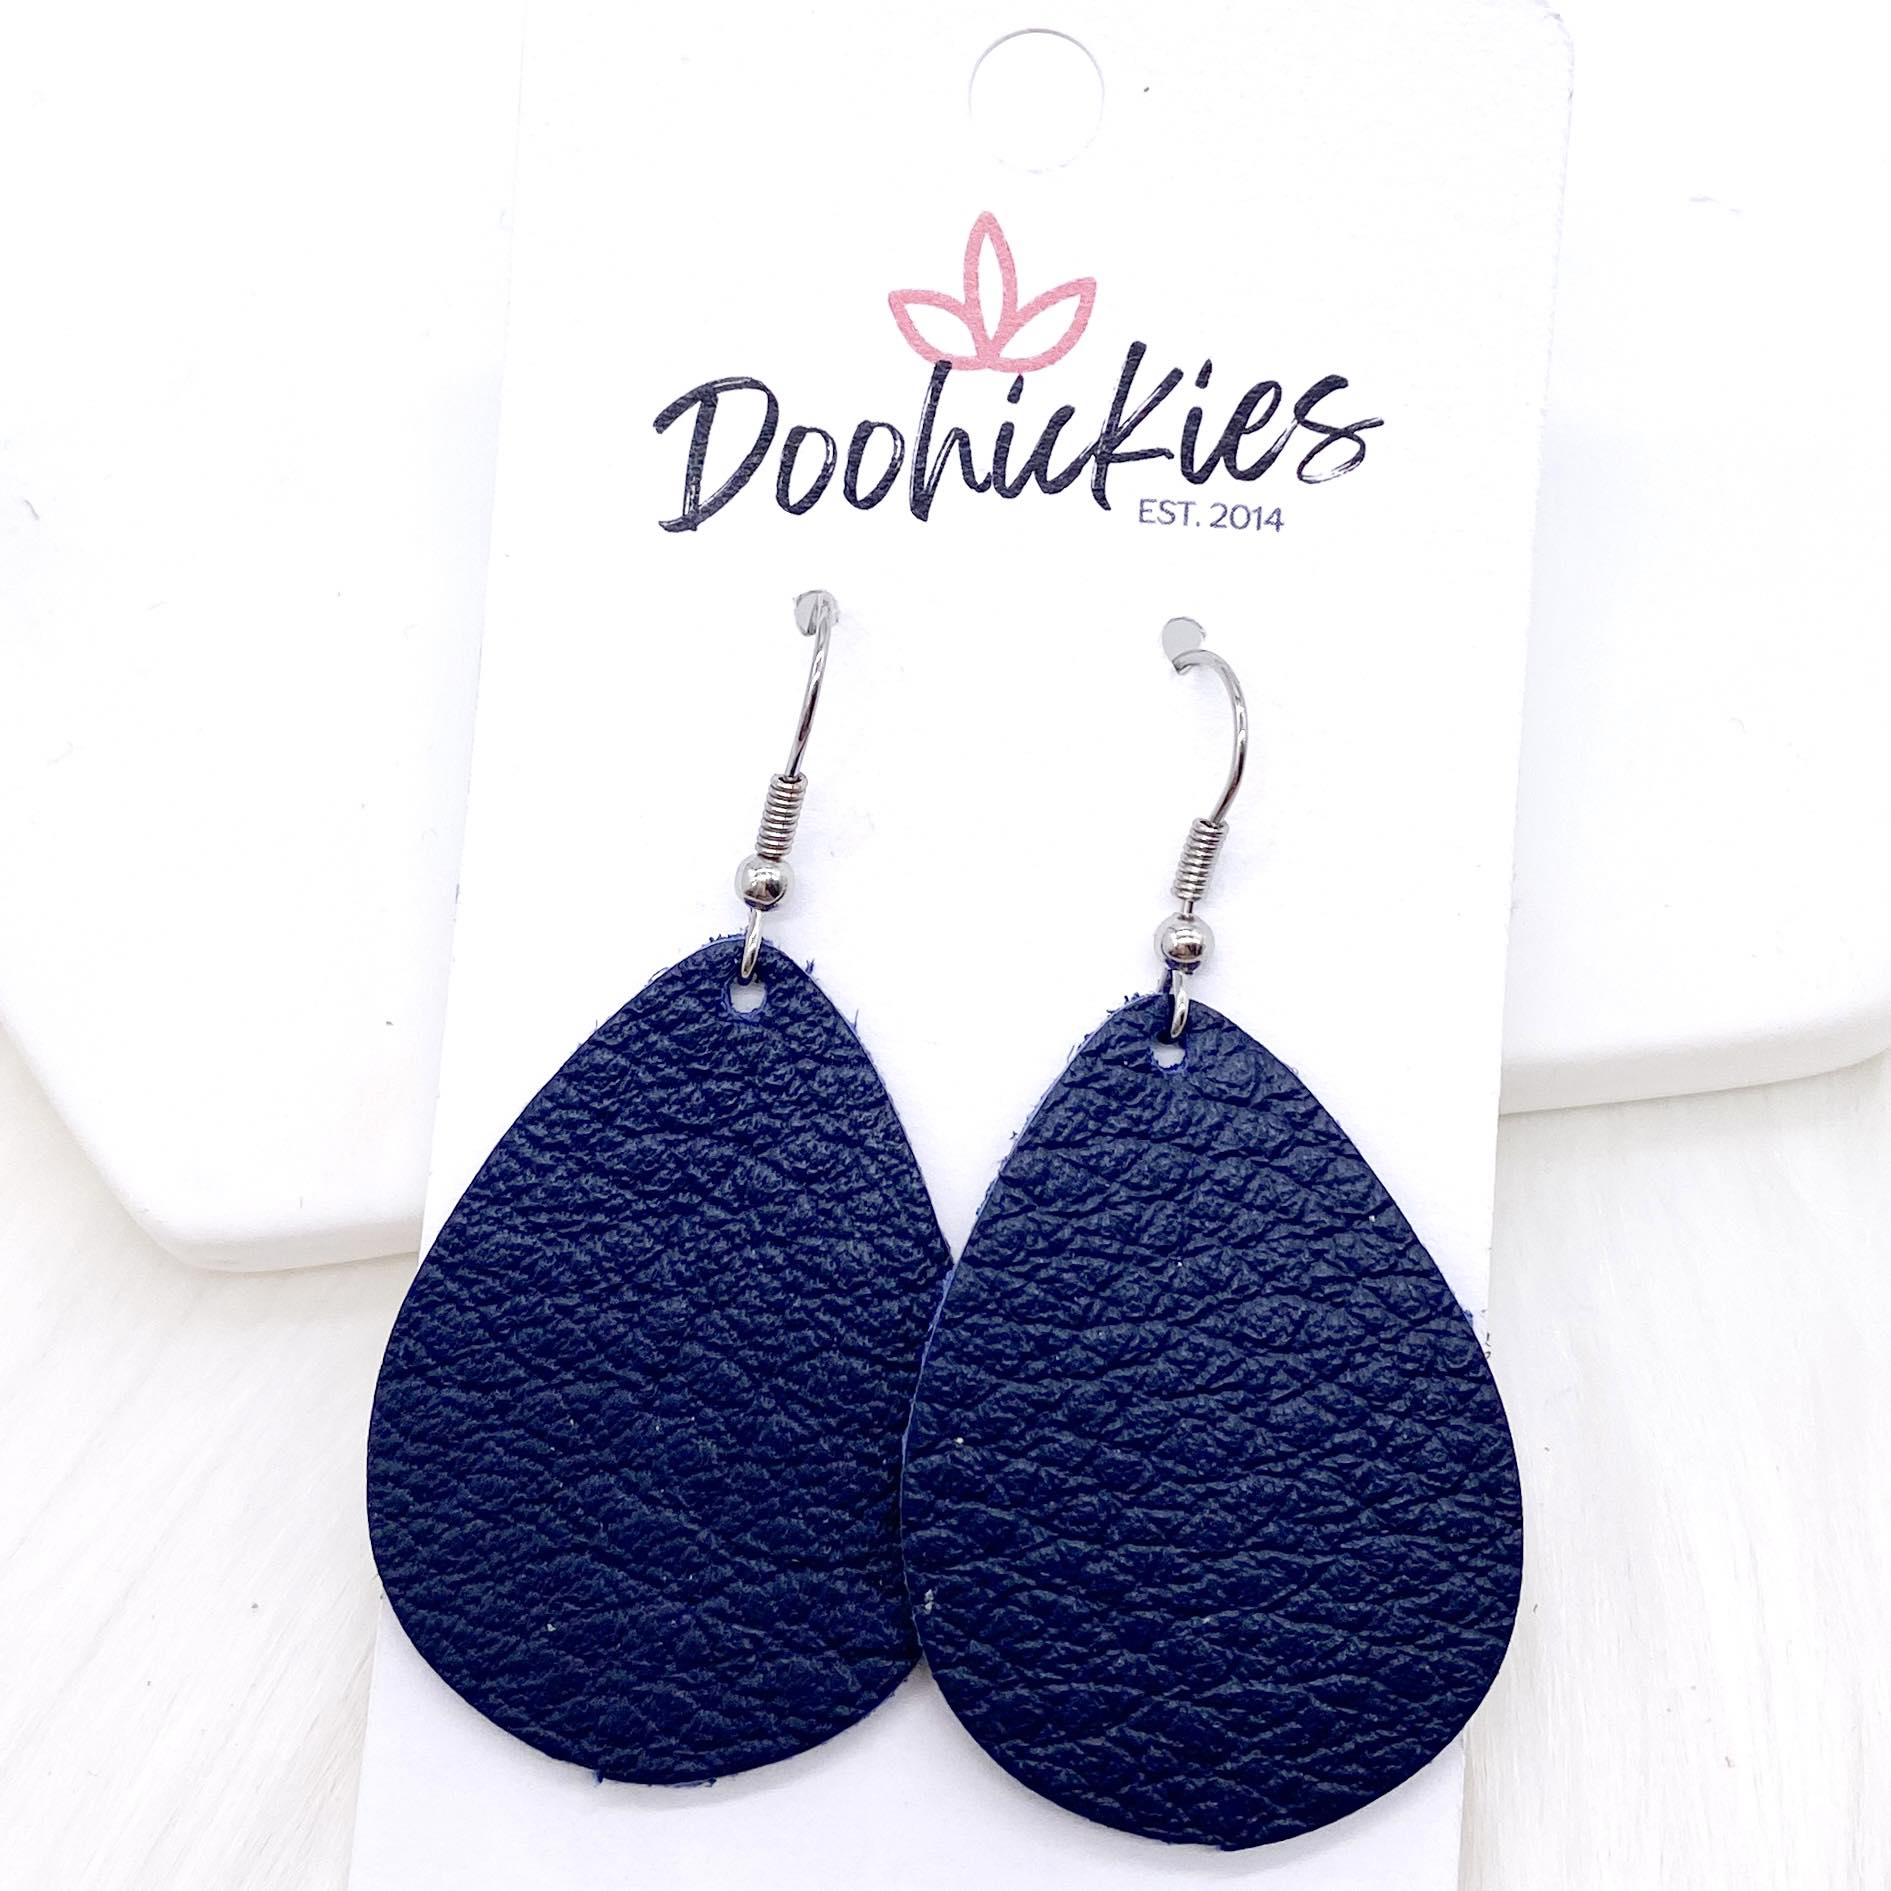 1.5" Navy Poppy Mini Collection -Fall Leather Earrings